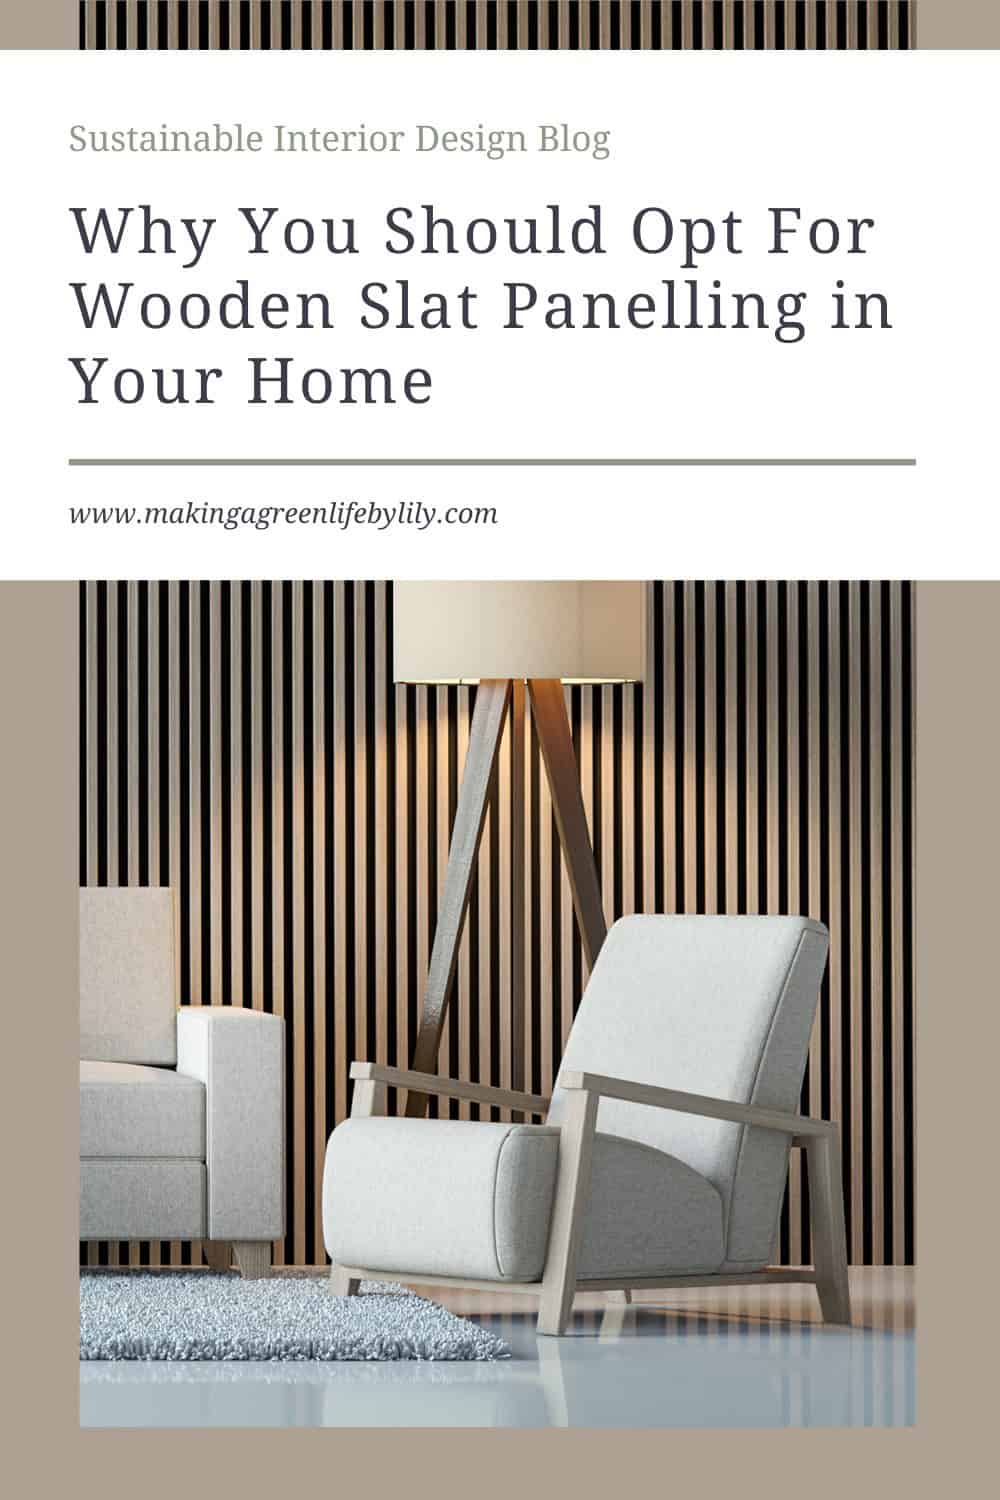 Why you should opt for wooden slat panelling in your home